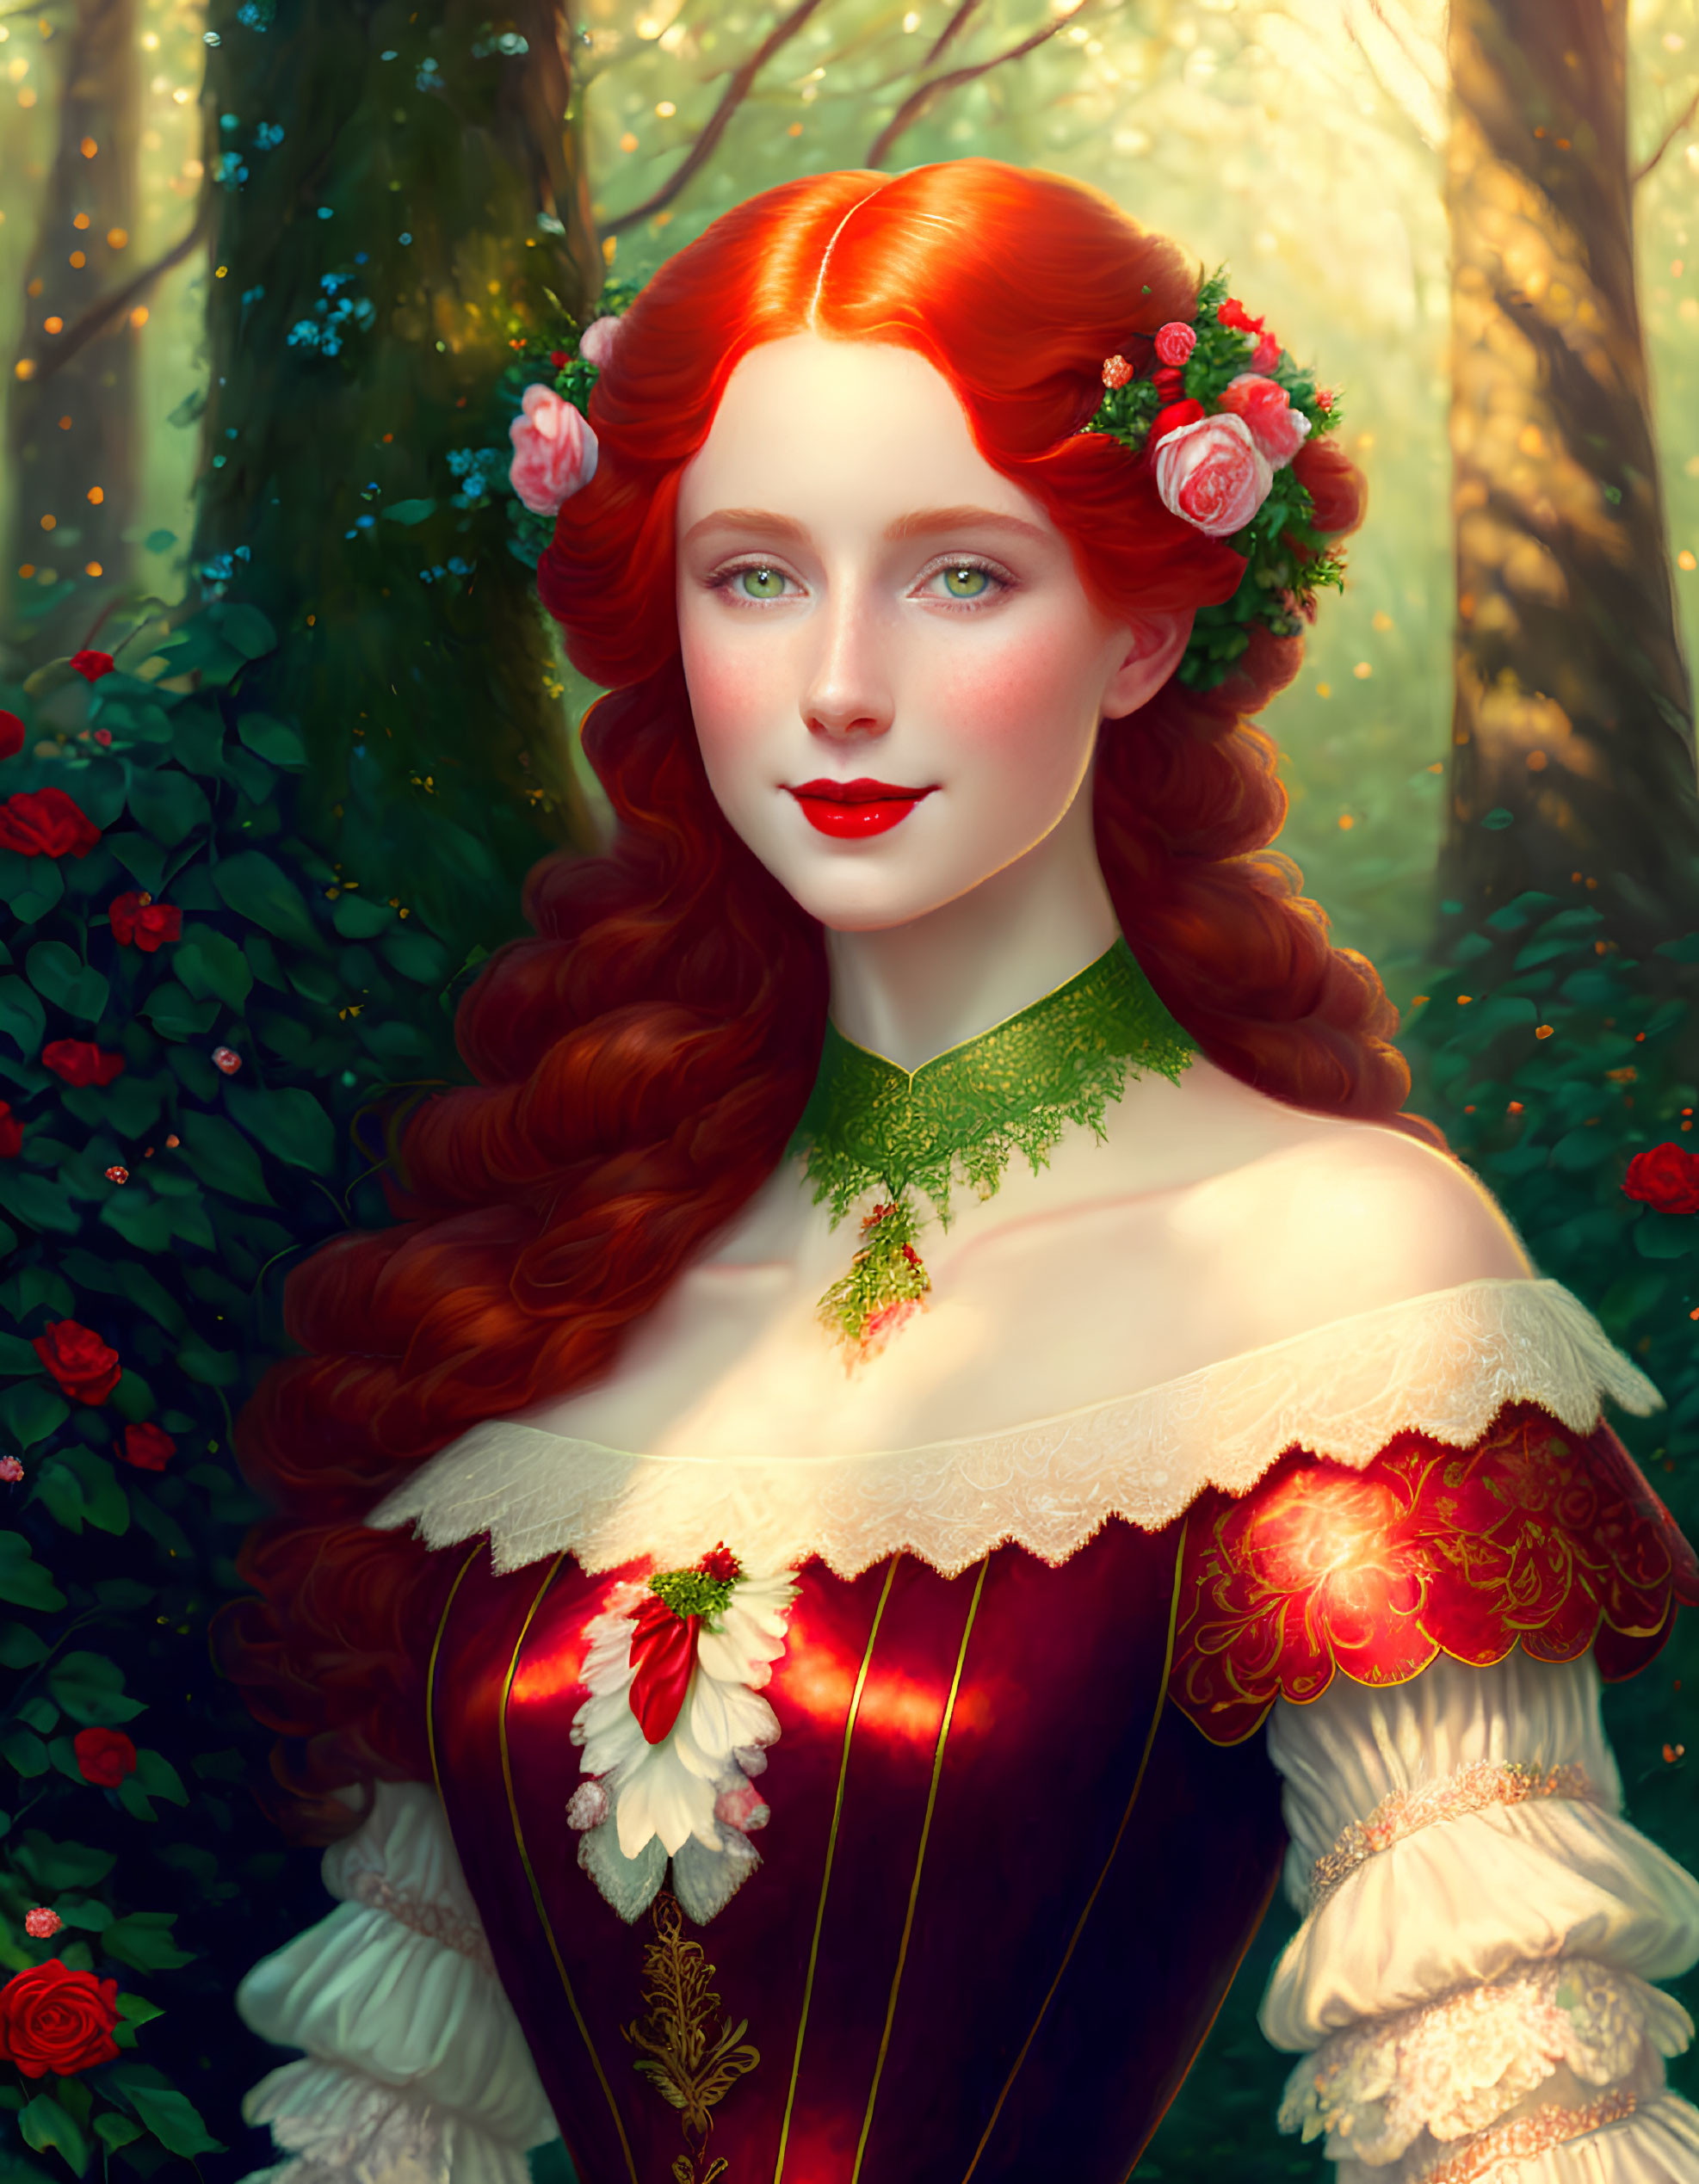 Illustration of woman with red hair, roses, Victorian dress, green choker